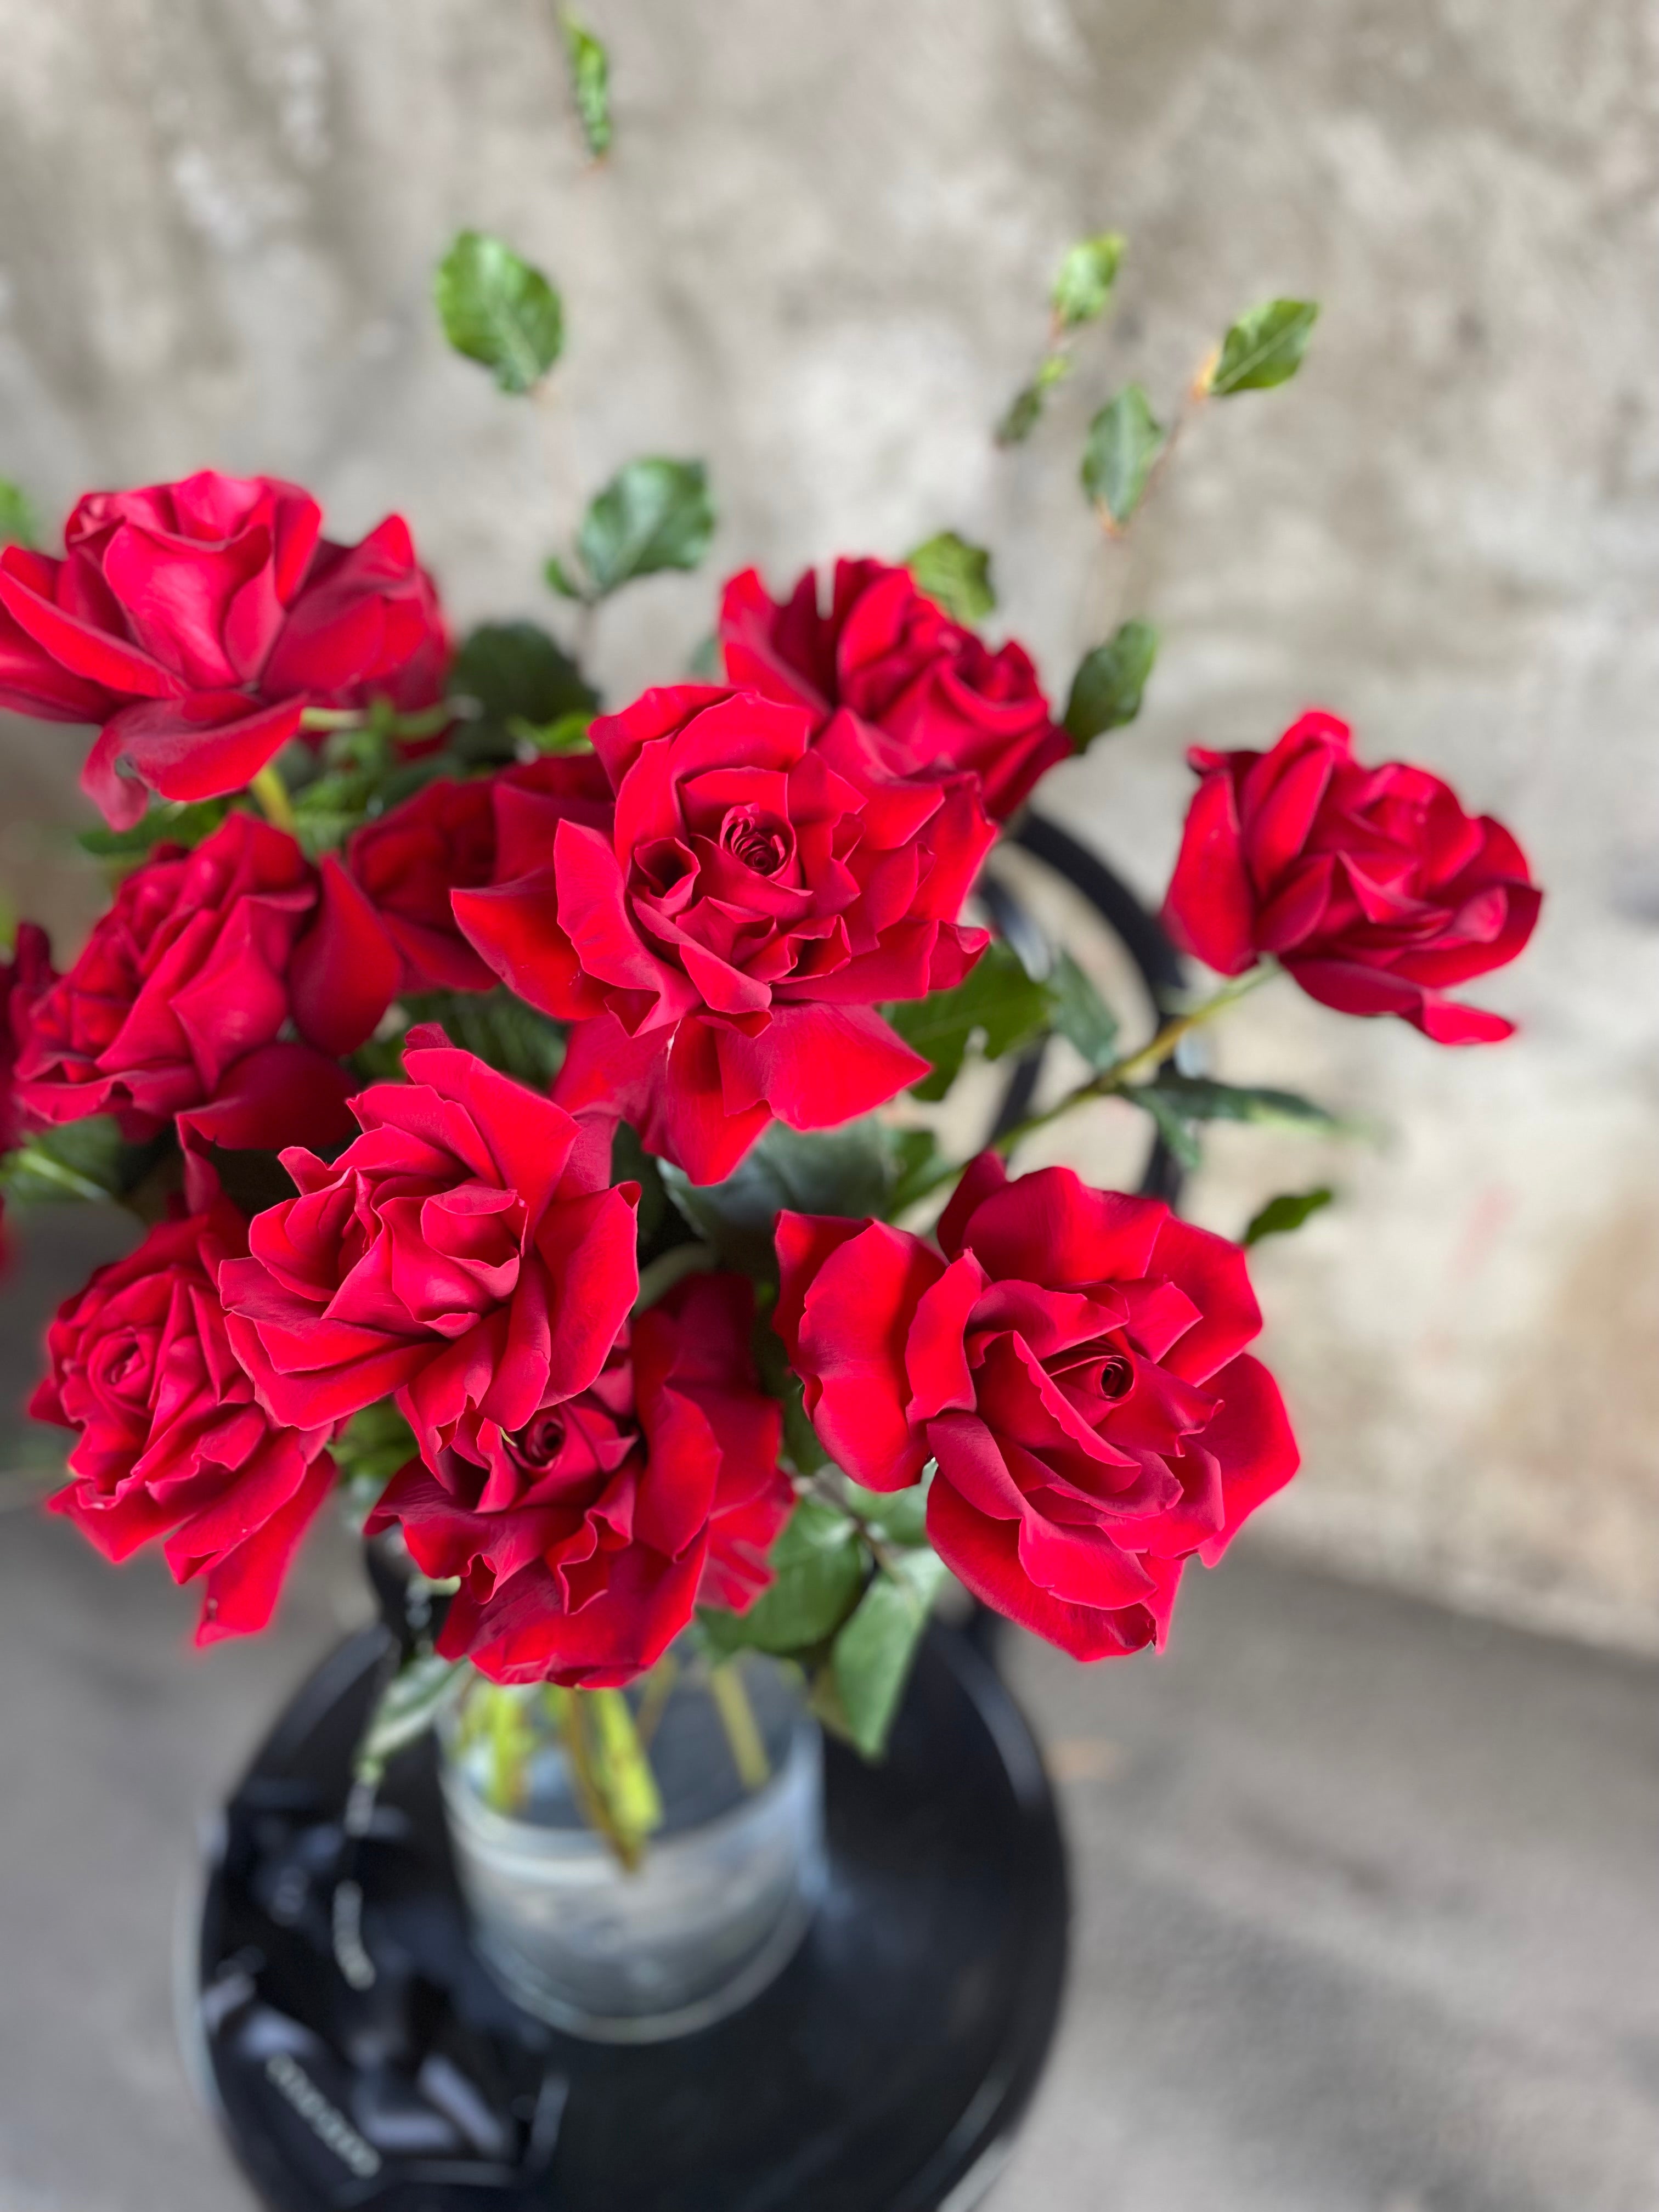 Above image of red roses. Clear glass vase featuring 10 stems of red roses, sitting on a black bentwood chair in front of a concrete wall.